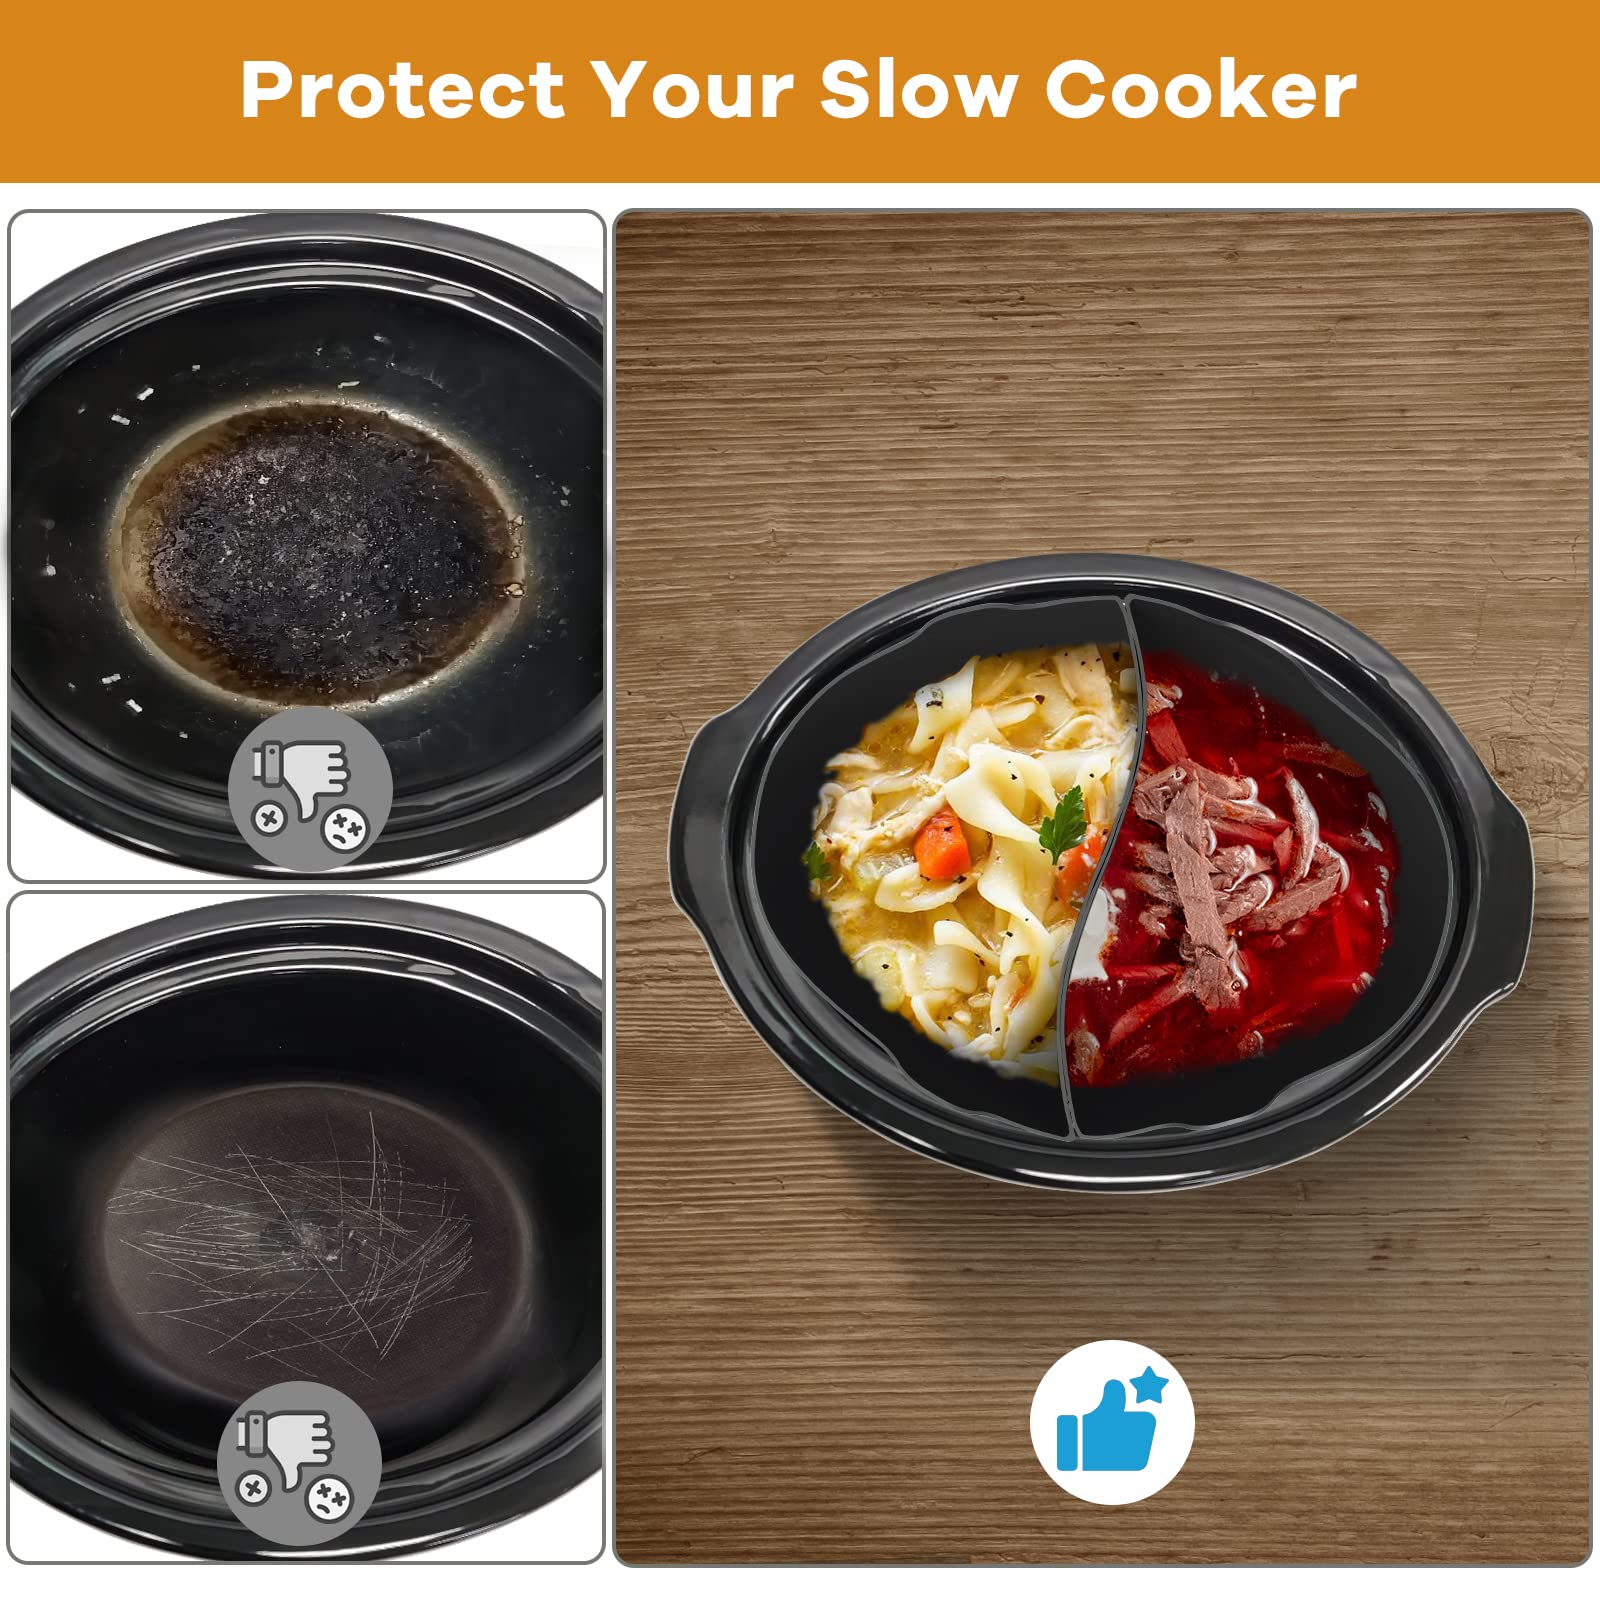 Horuhue Silicone Slow Cooker Liners Fit for Crockpot & Hamilton Beach 6-7QT, Silicone Slow Cooker Divider Liner, Reusable/BPA Free/Slow Cooker Accessories Cooking Liner for Most 6 Quart Slow Cooker